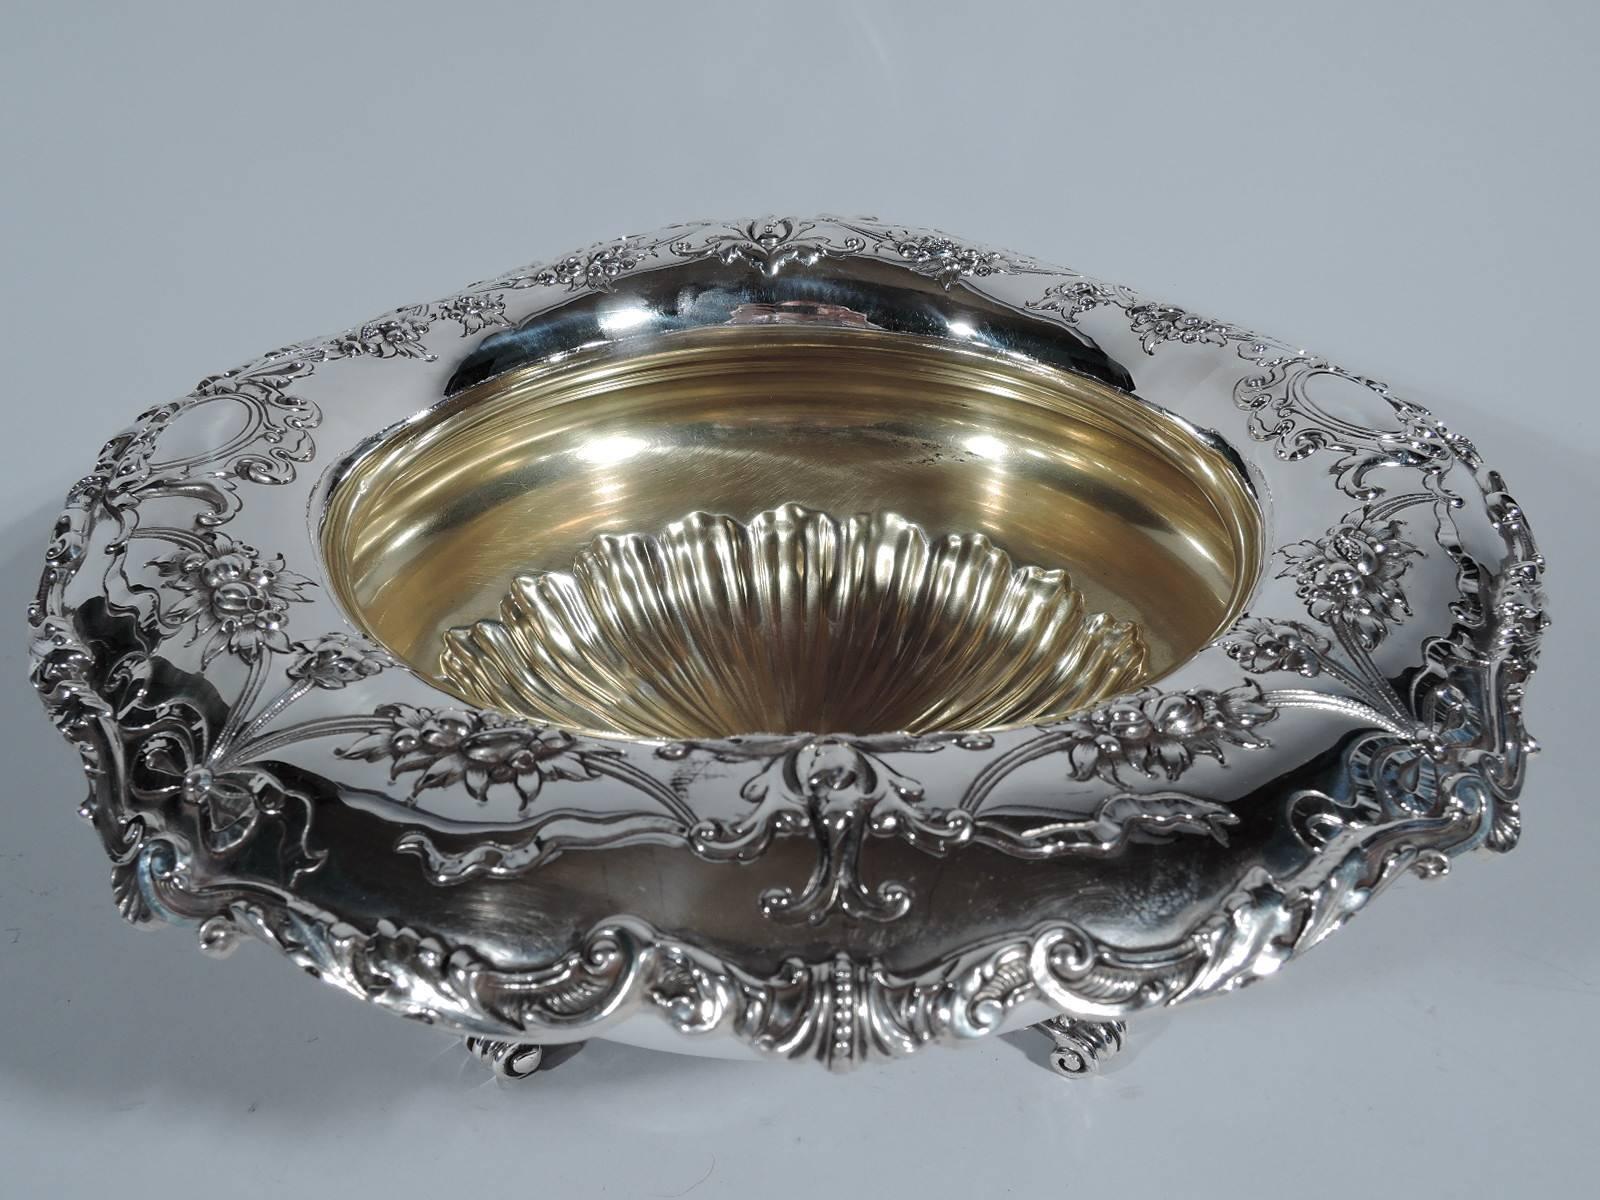 Edwardian sterling silver centerpiece bowl. Made by Gorham in Providence, circa 1910. Bellied with turned-down rim decorated with garlands and ribbon as well as applied scrolls and shells. Interior gilt with radiating flutes. Four volute scroll